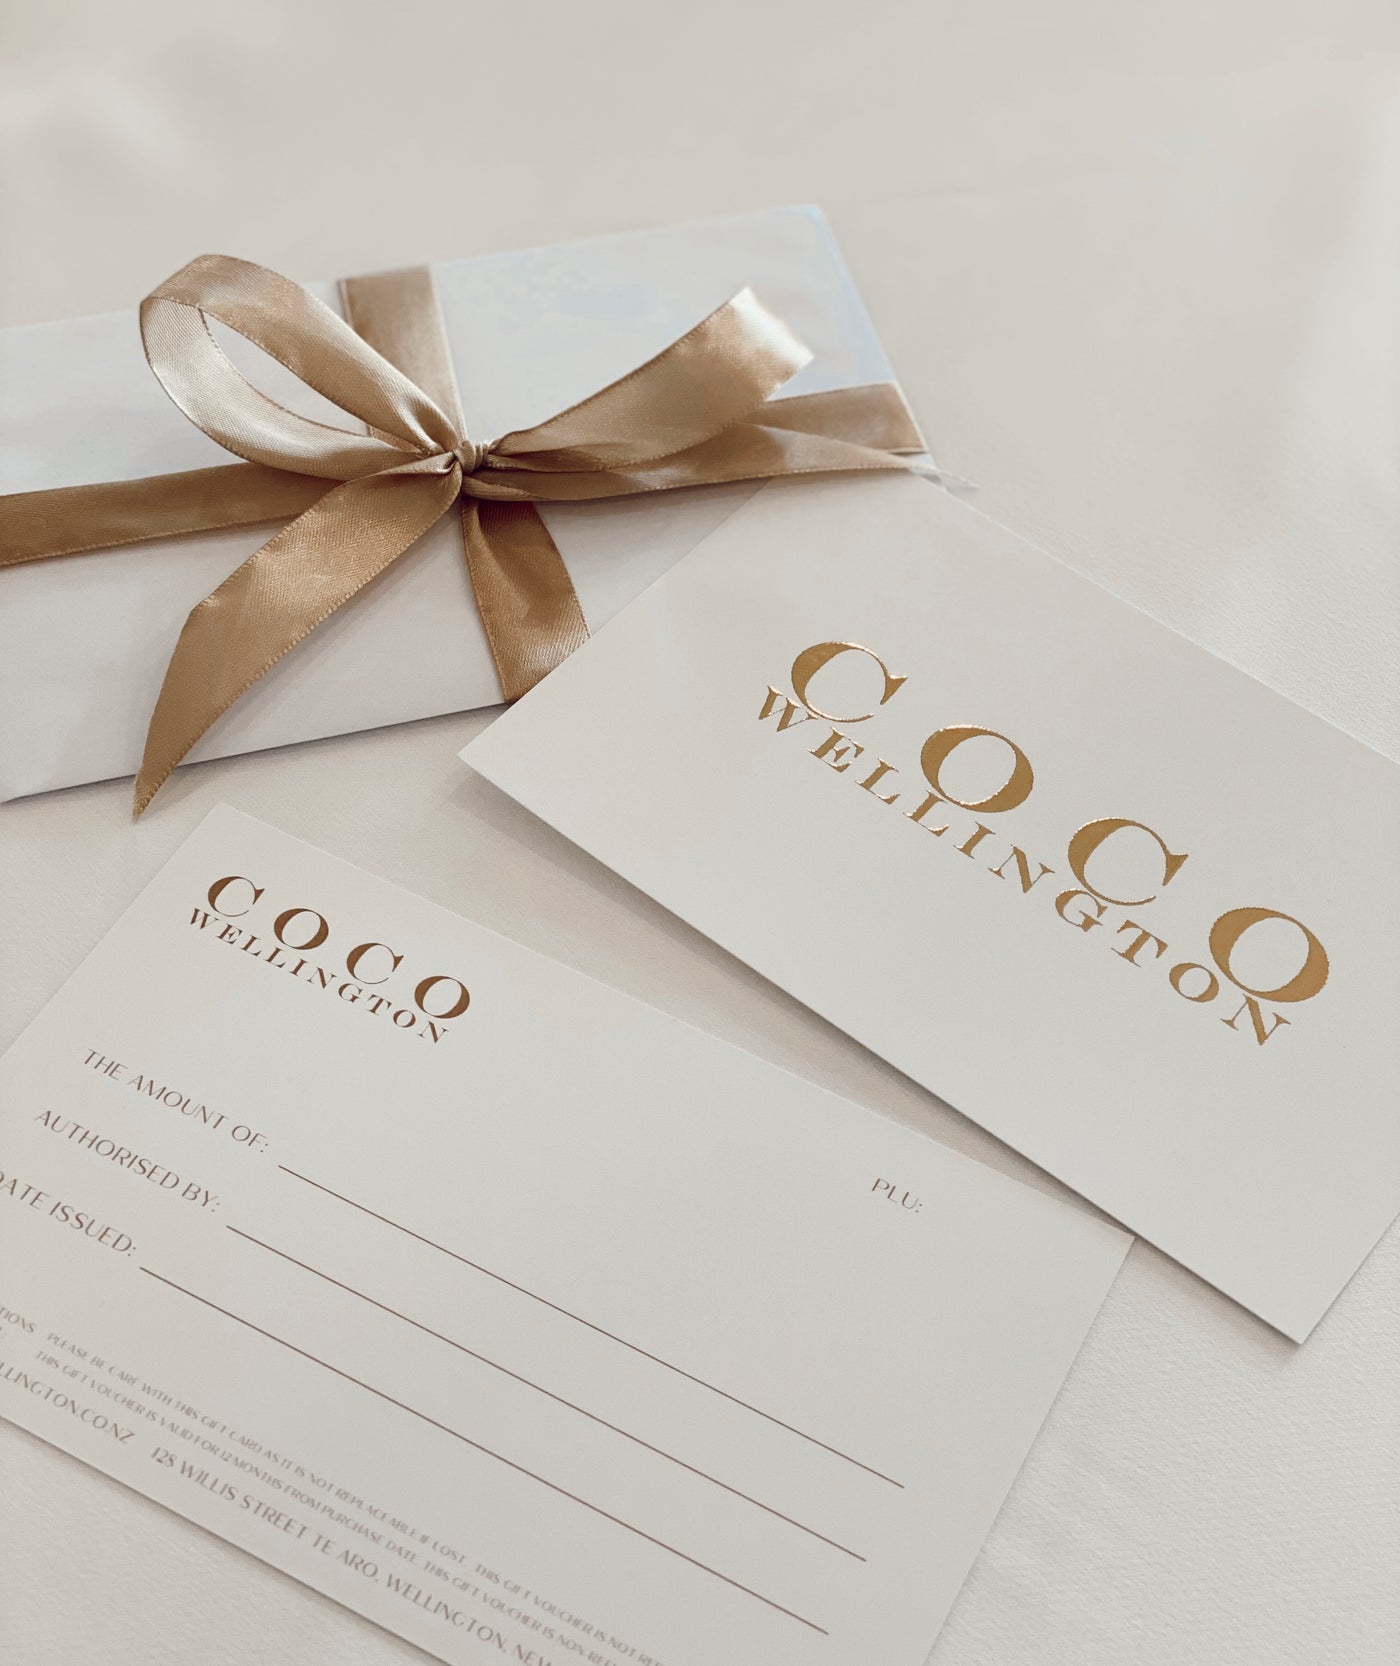 COCO GIFT CARD